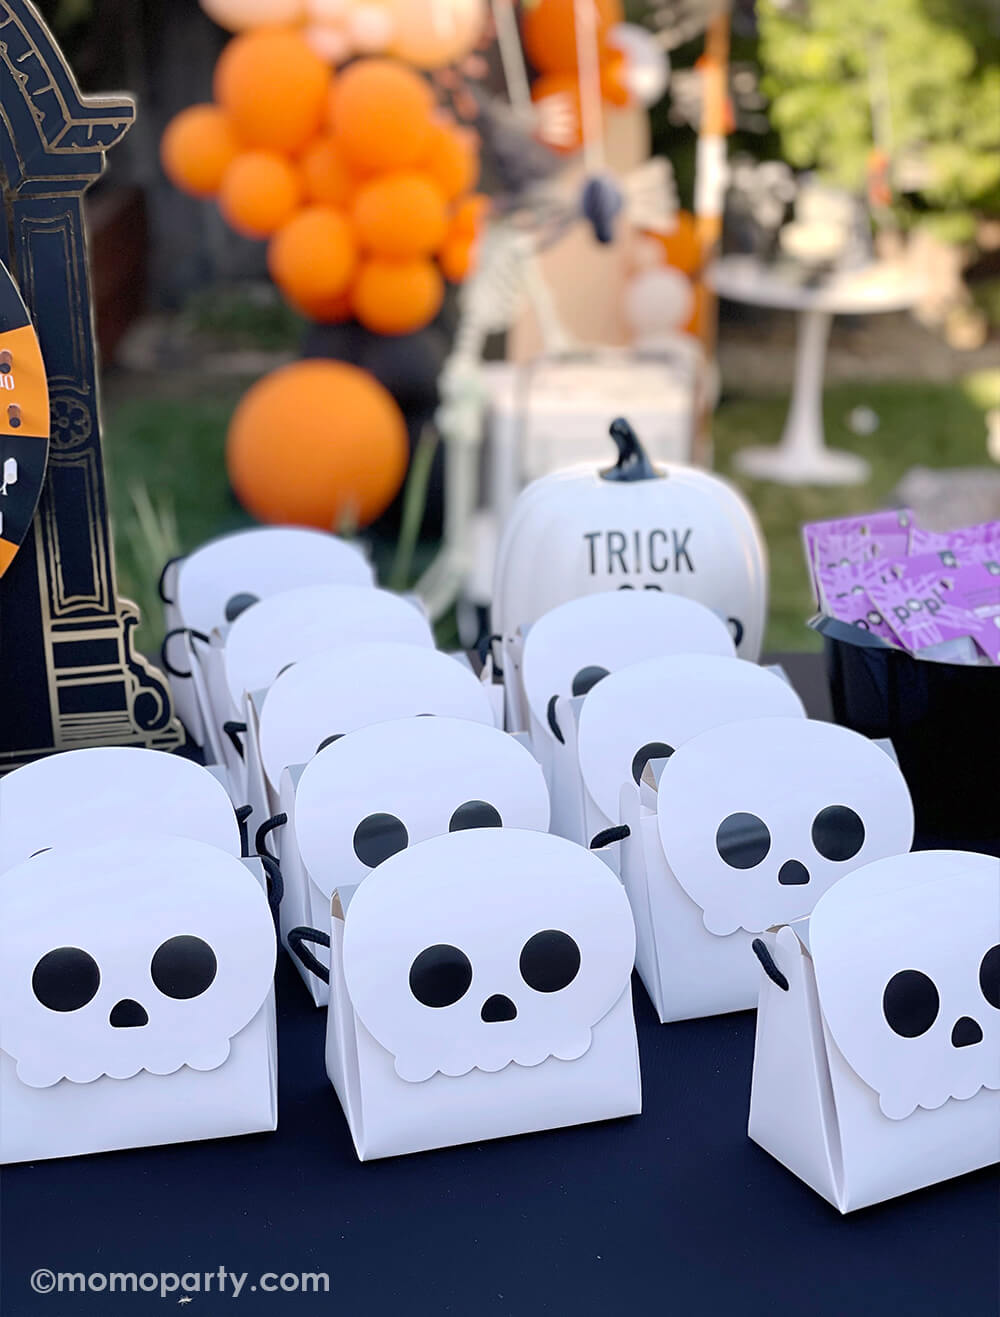 Rows of Skull shaped goodie bags filled with treats and candies for a kid's Halloween themed birthday party.